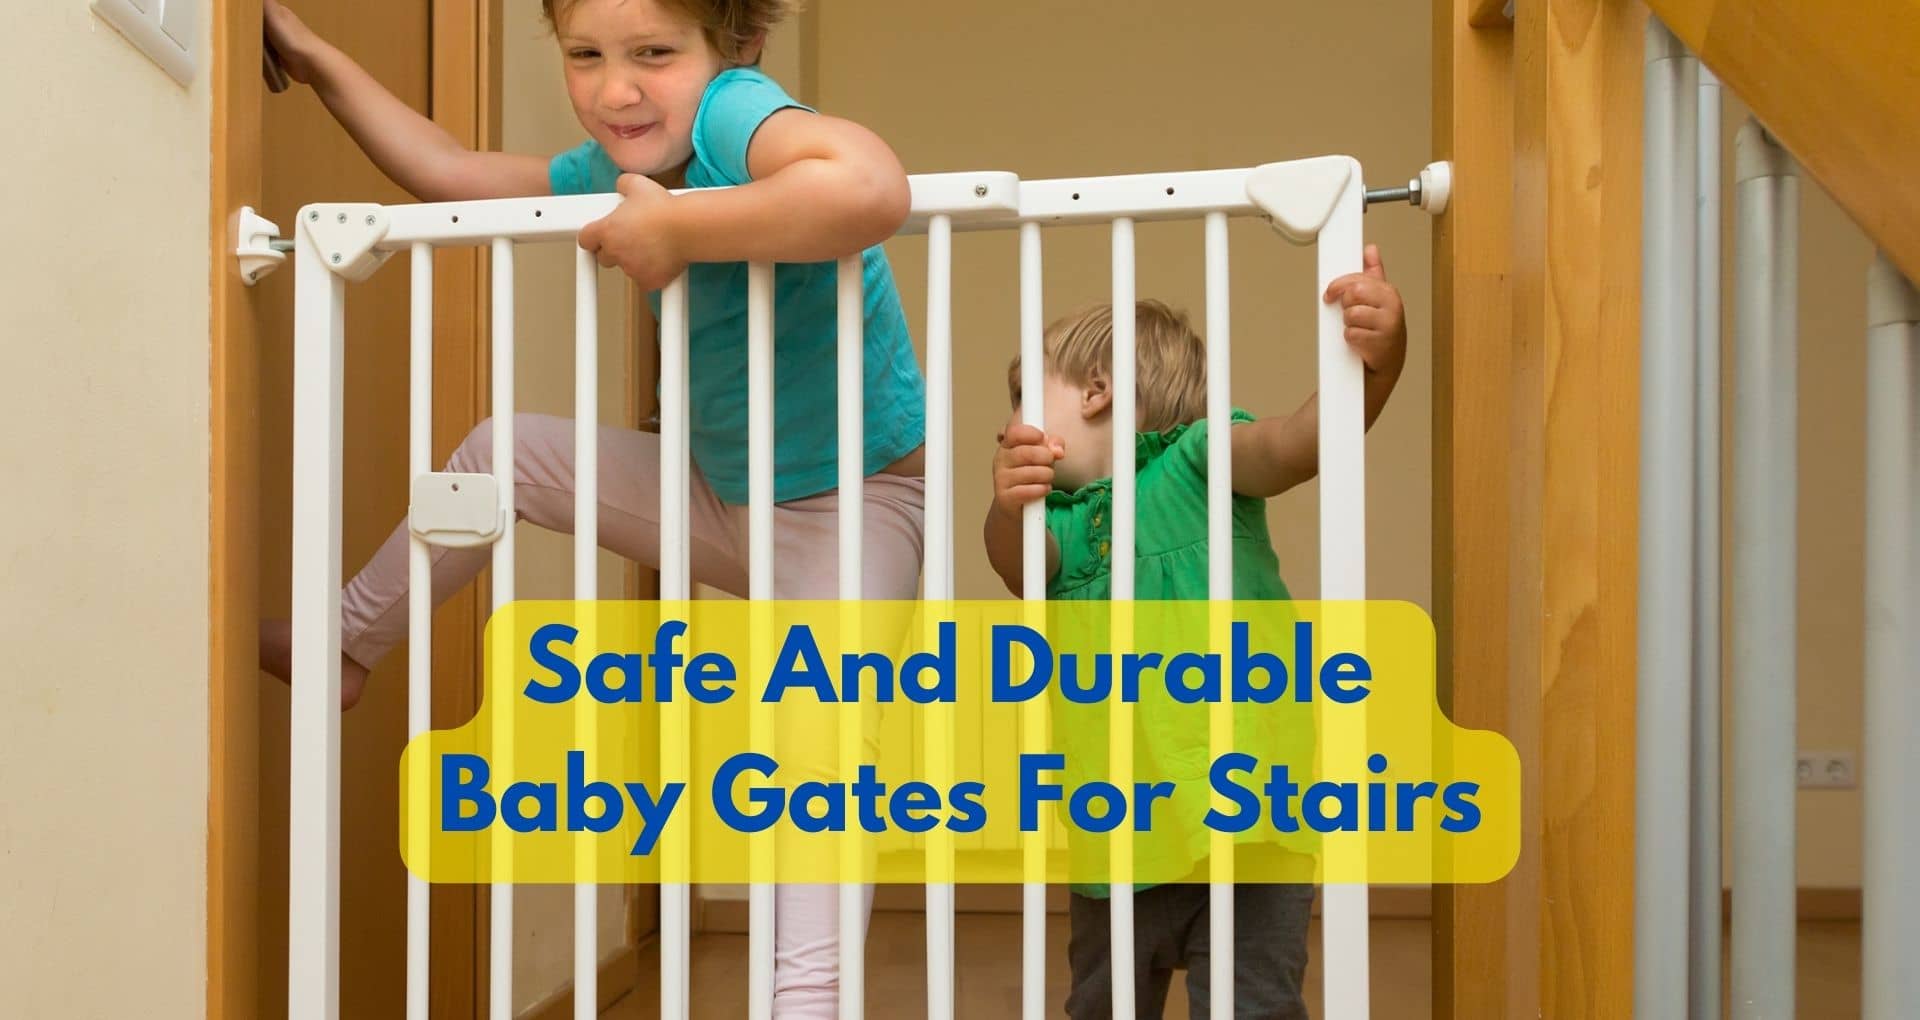 How Do I Choose Safe And Durable Baby Gates For Stairs?